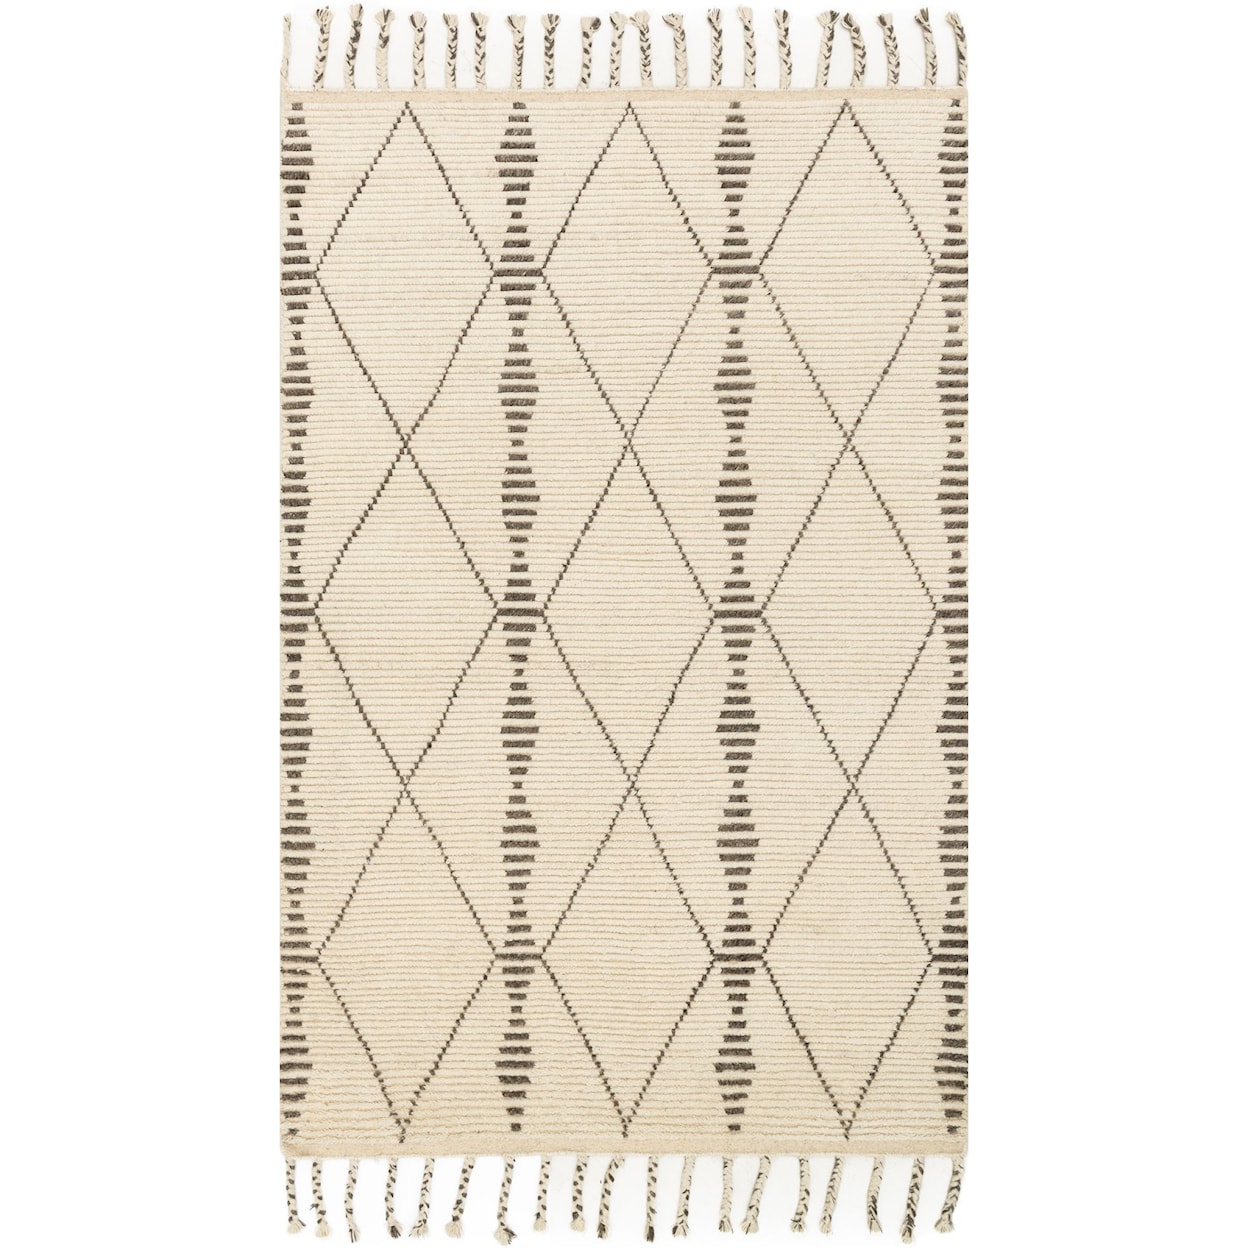 Magnolia Home by Joanna Gaines for Loloi Tulum 9' 6" x 13' 6" Rectangle Rug